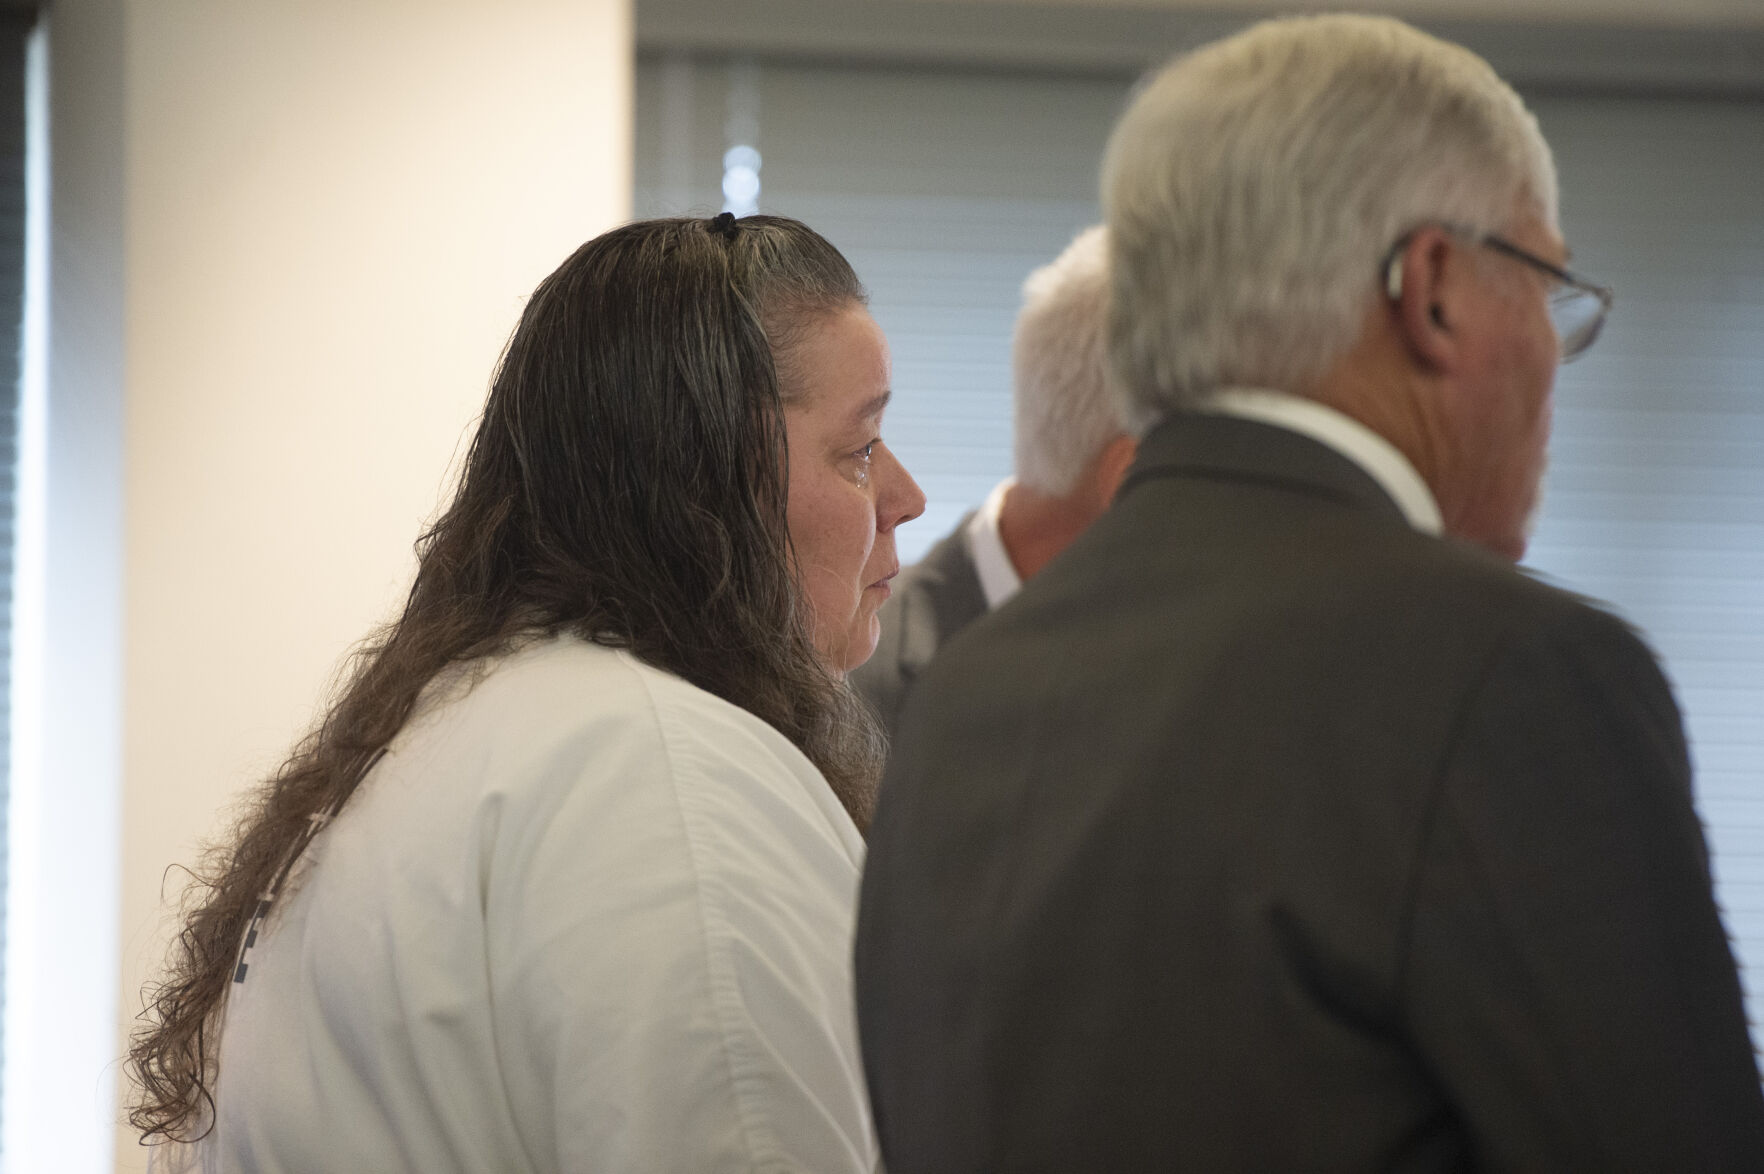 West Yellowstone woman pleads guilty to deliberate homicide in grandsons death Crime and Courts bozemandailychronicle